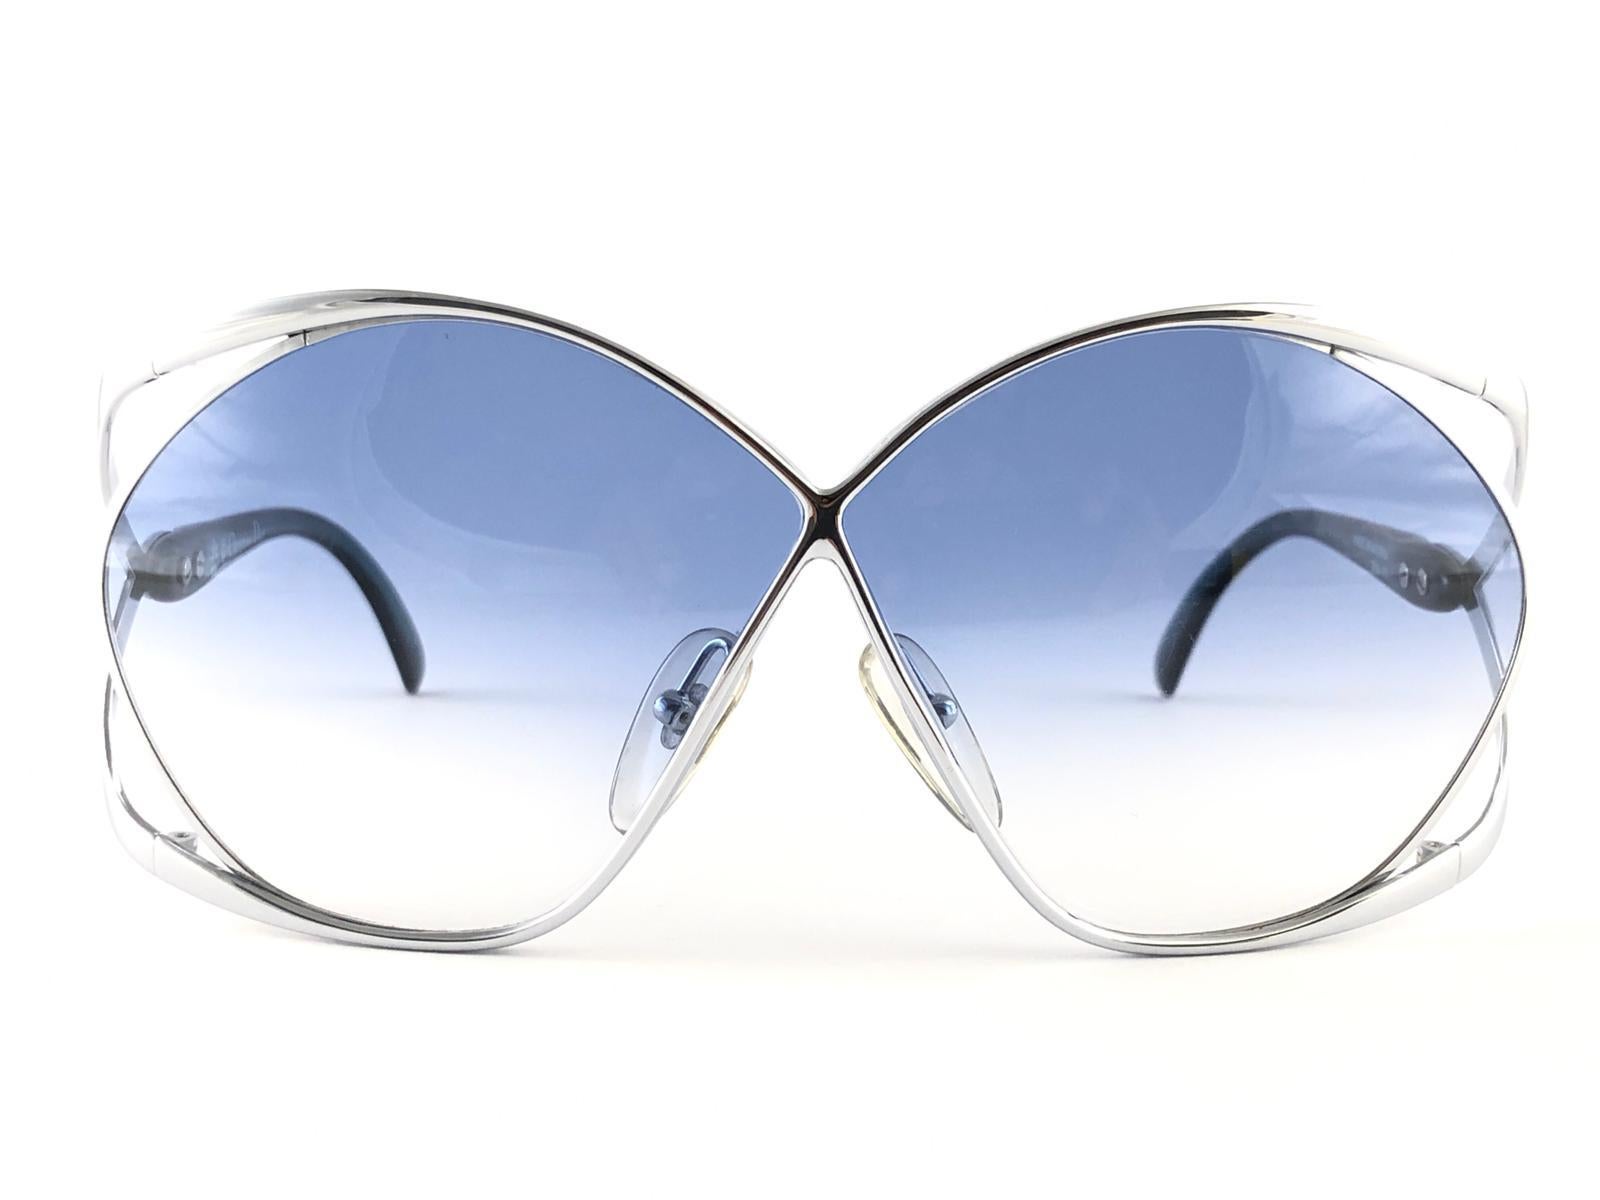  Highly coveted Christian Dior butterly shape in sleek silver & green combination. Spotless blue gradient lenses. A collector’s piece!  
New, never worn or displayed. This item may show minor sign of wear due to storage.
Made in Austria. 

FRONT :